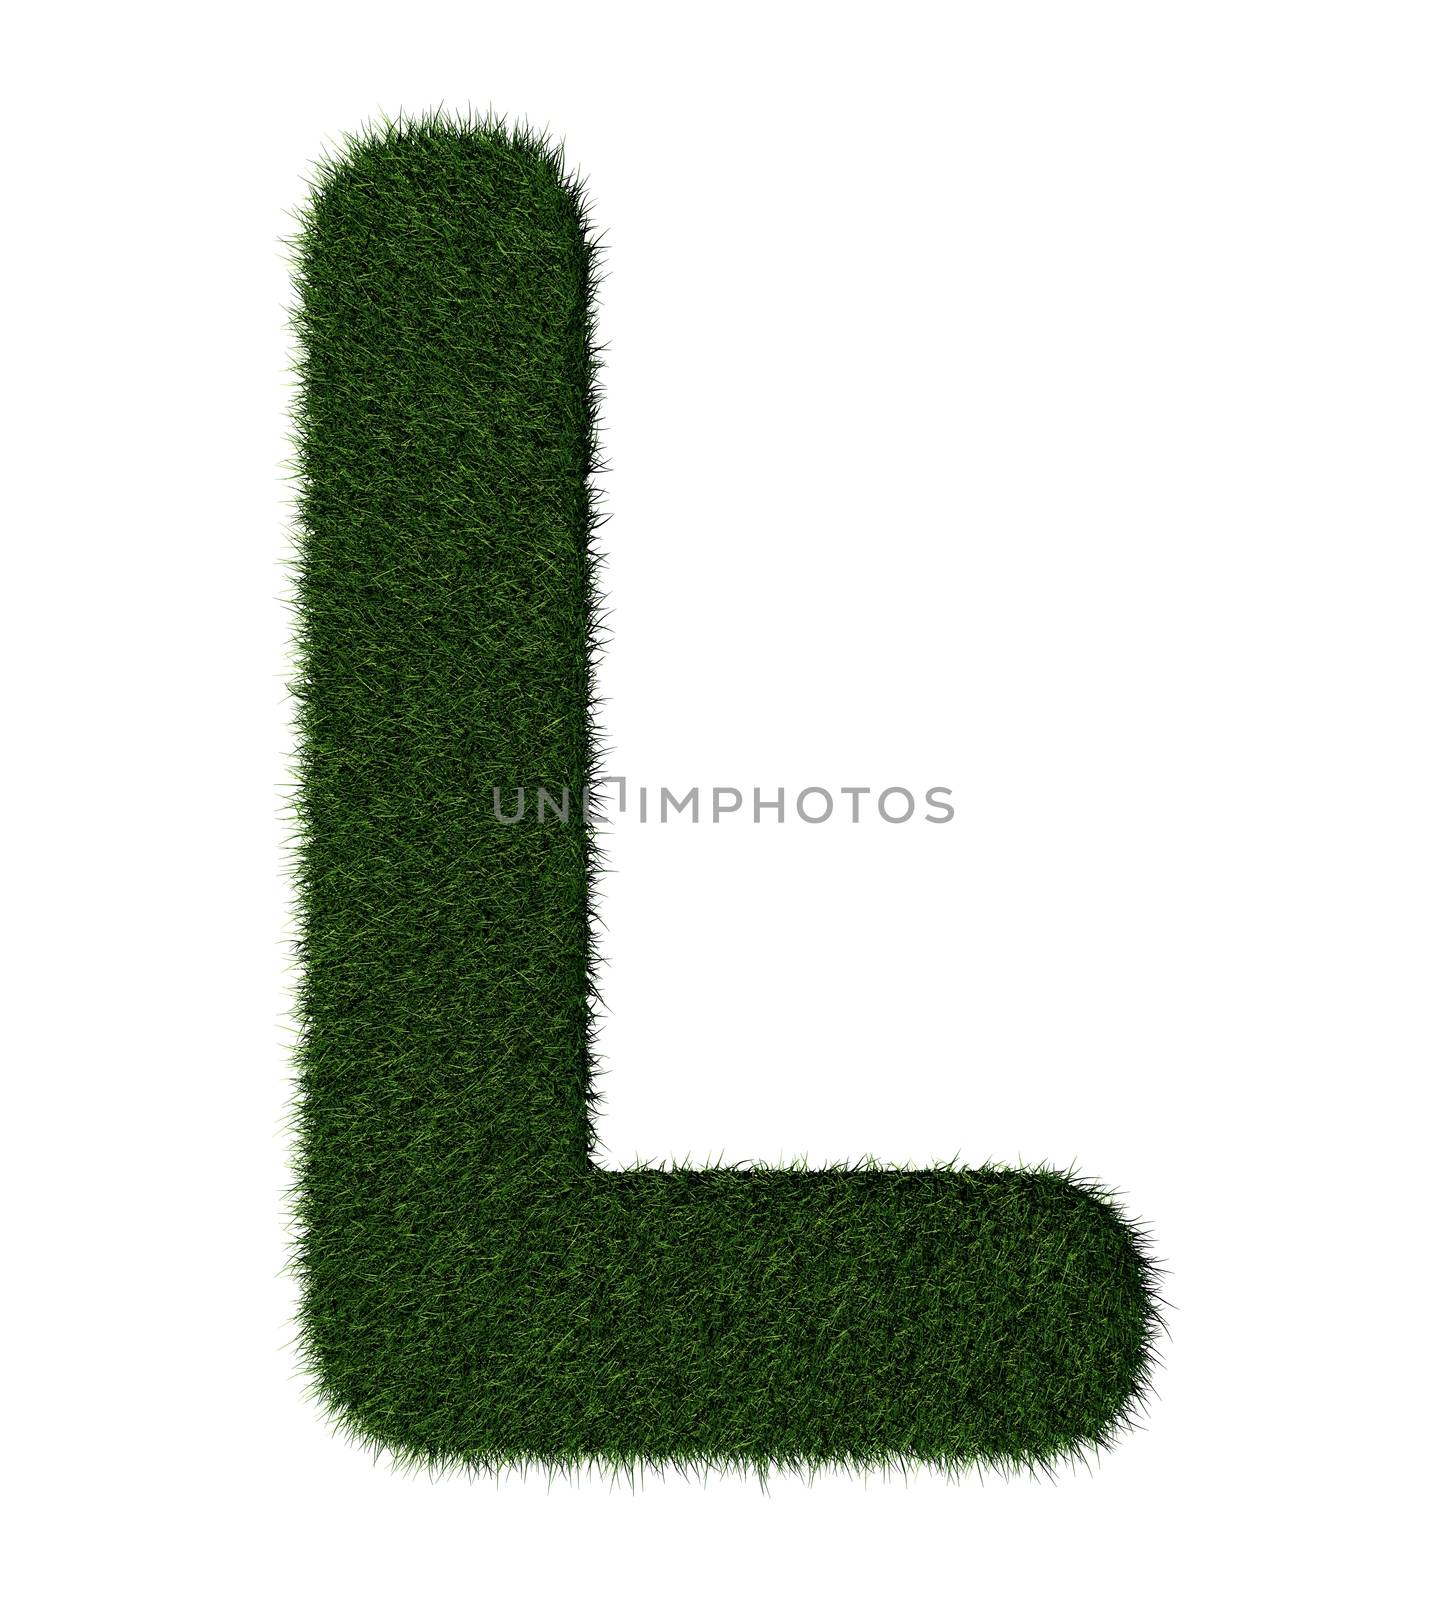 Letter L made with blades of grass